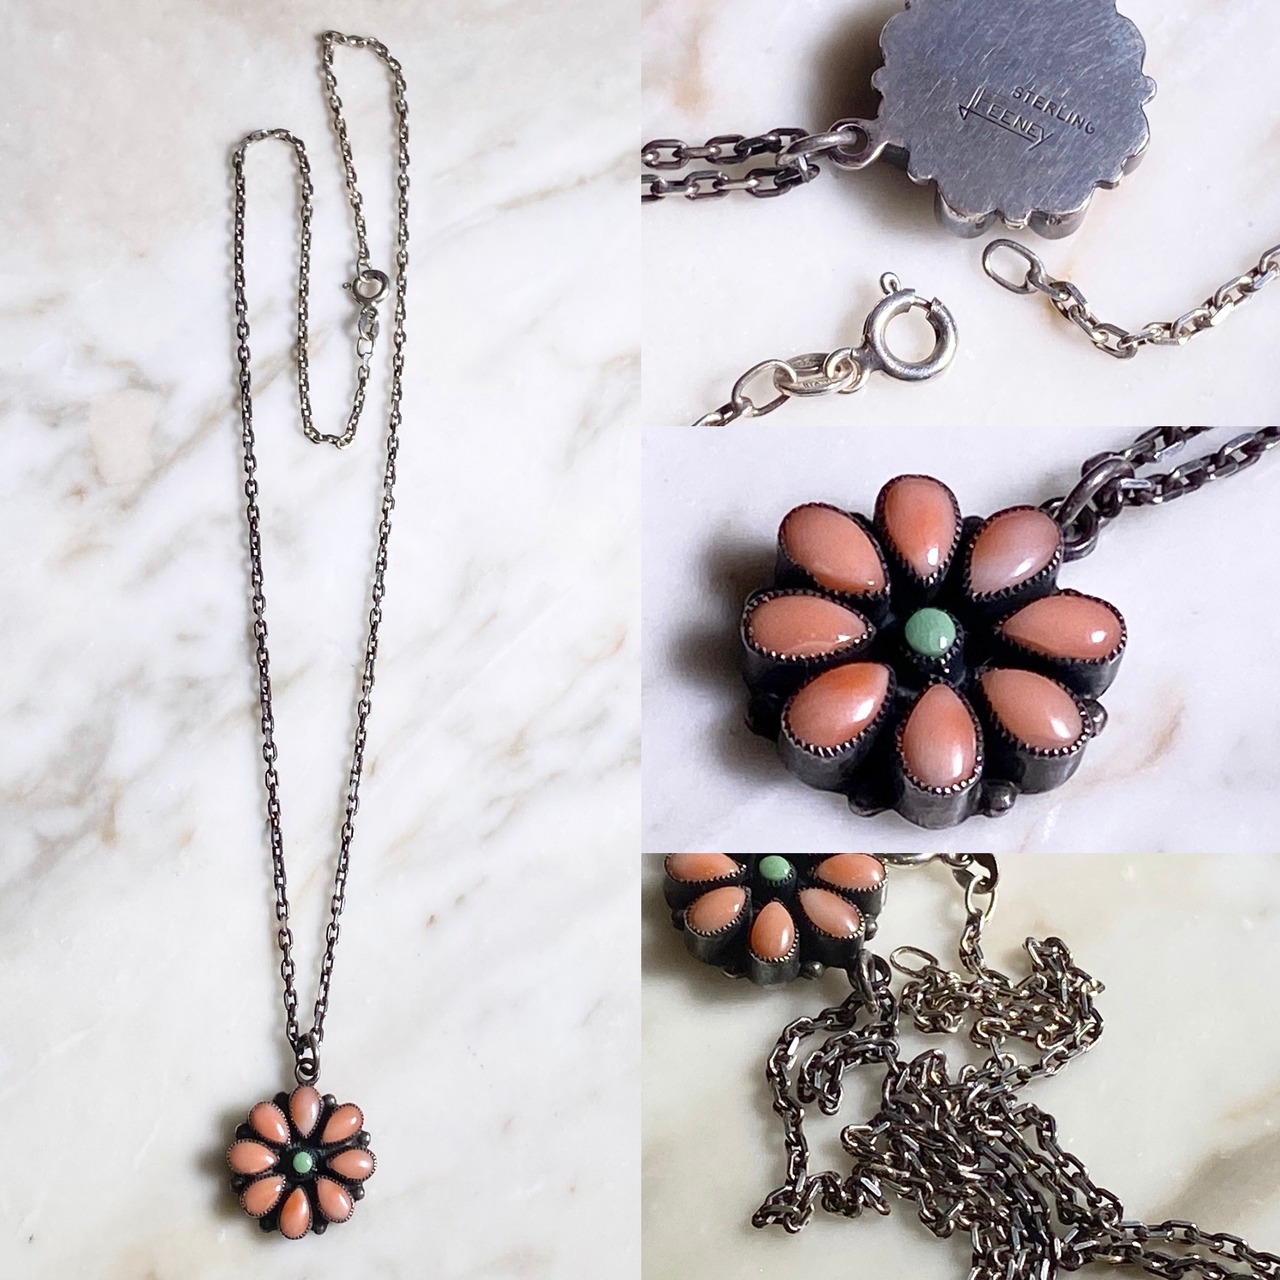 LEO FEENEY silver flower pendant necklace set with pink coral & turquoise